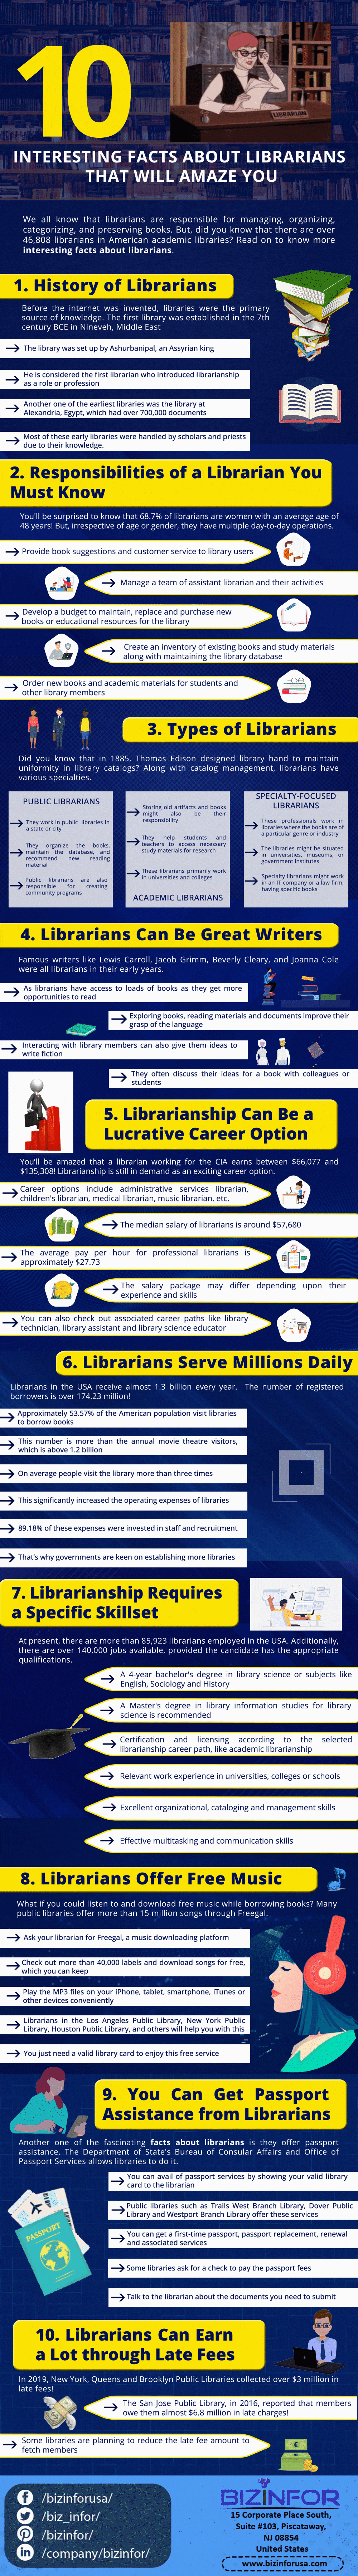 interesting-facts-about-librarians-infographic